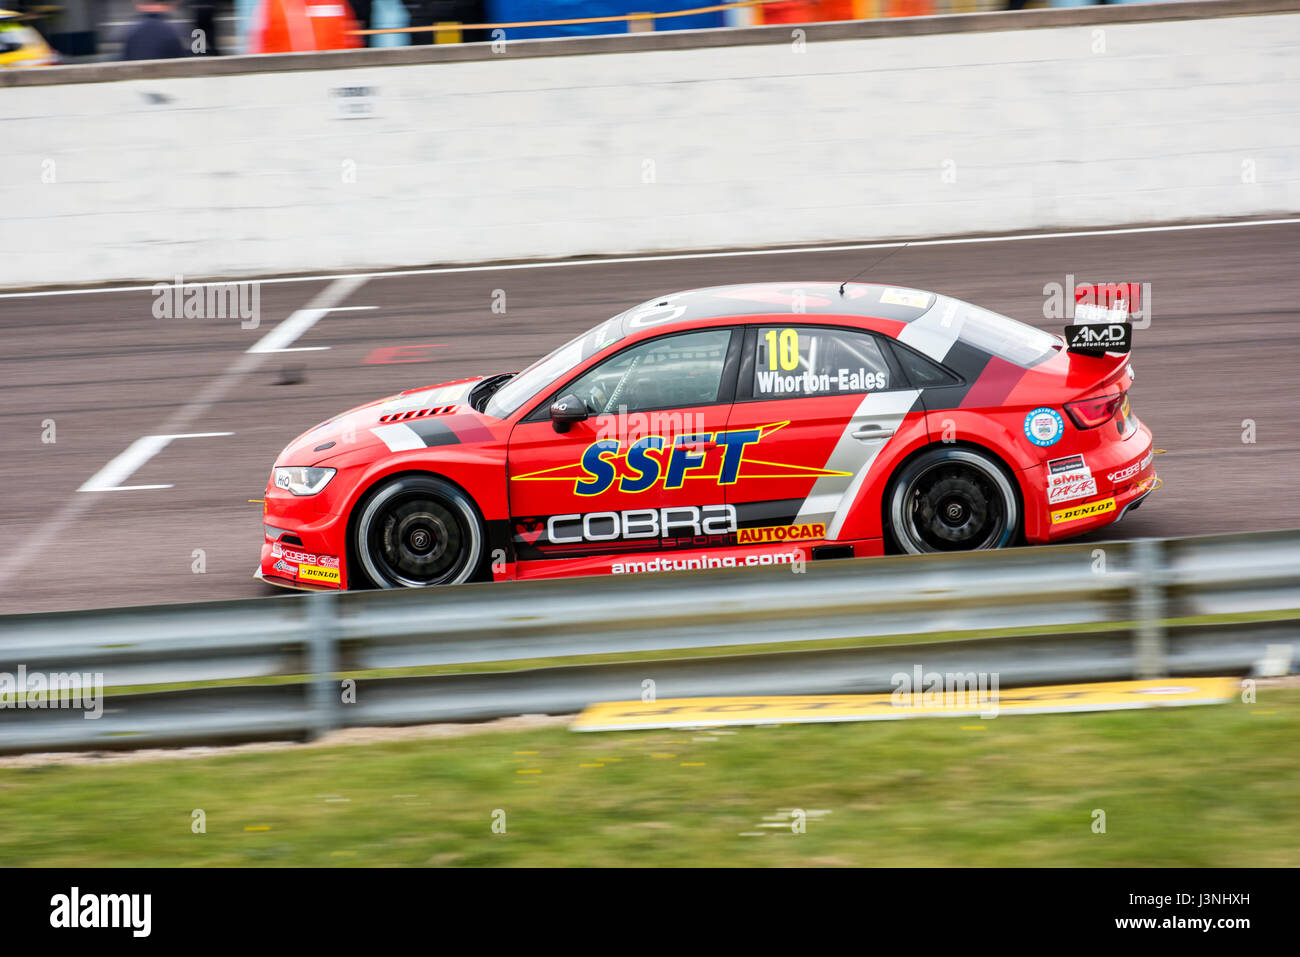 Hampshire, UK. 6th May, 2017. Thruxton Race Circuit and Motorsport Centre, Andover, Hampshire, United Kingdom. 6 May 2016. Ant Whorton-Eales of team AmDtuning.com with Cobra Exhausts Qualifying at Dunlop MSA British Touring Car Championship in his Audi S3. All cars race today with the #BillyWhizz number plates and livery in support of Billy Monger who suffered life changing injuries at Donington Park a few weeks ago during an F4 (Formula 4) British Championship Race. © Will Bailey / Alamy Live News Stock Photo